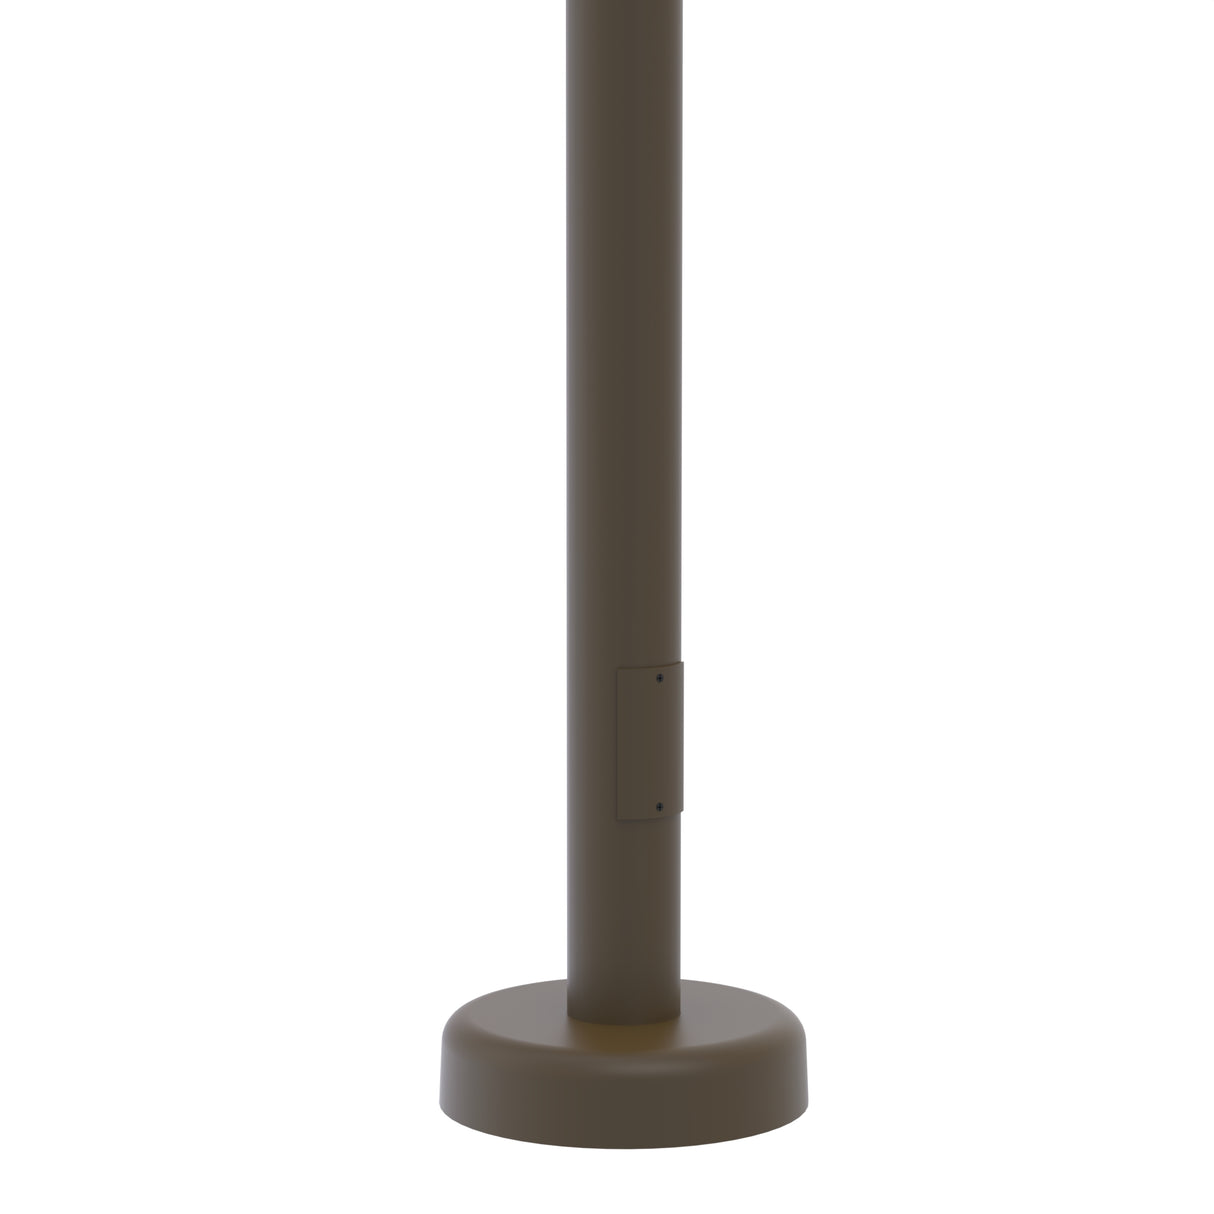 16' Tall x 5.0" Base OD x 3.0" Top OD x 0.125" Thick, Round Tapered Aluminum, Hinged Anchor Base Light Pole